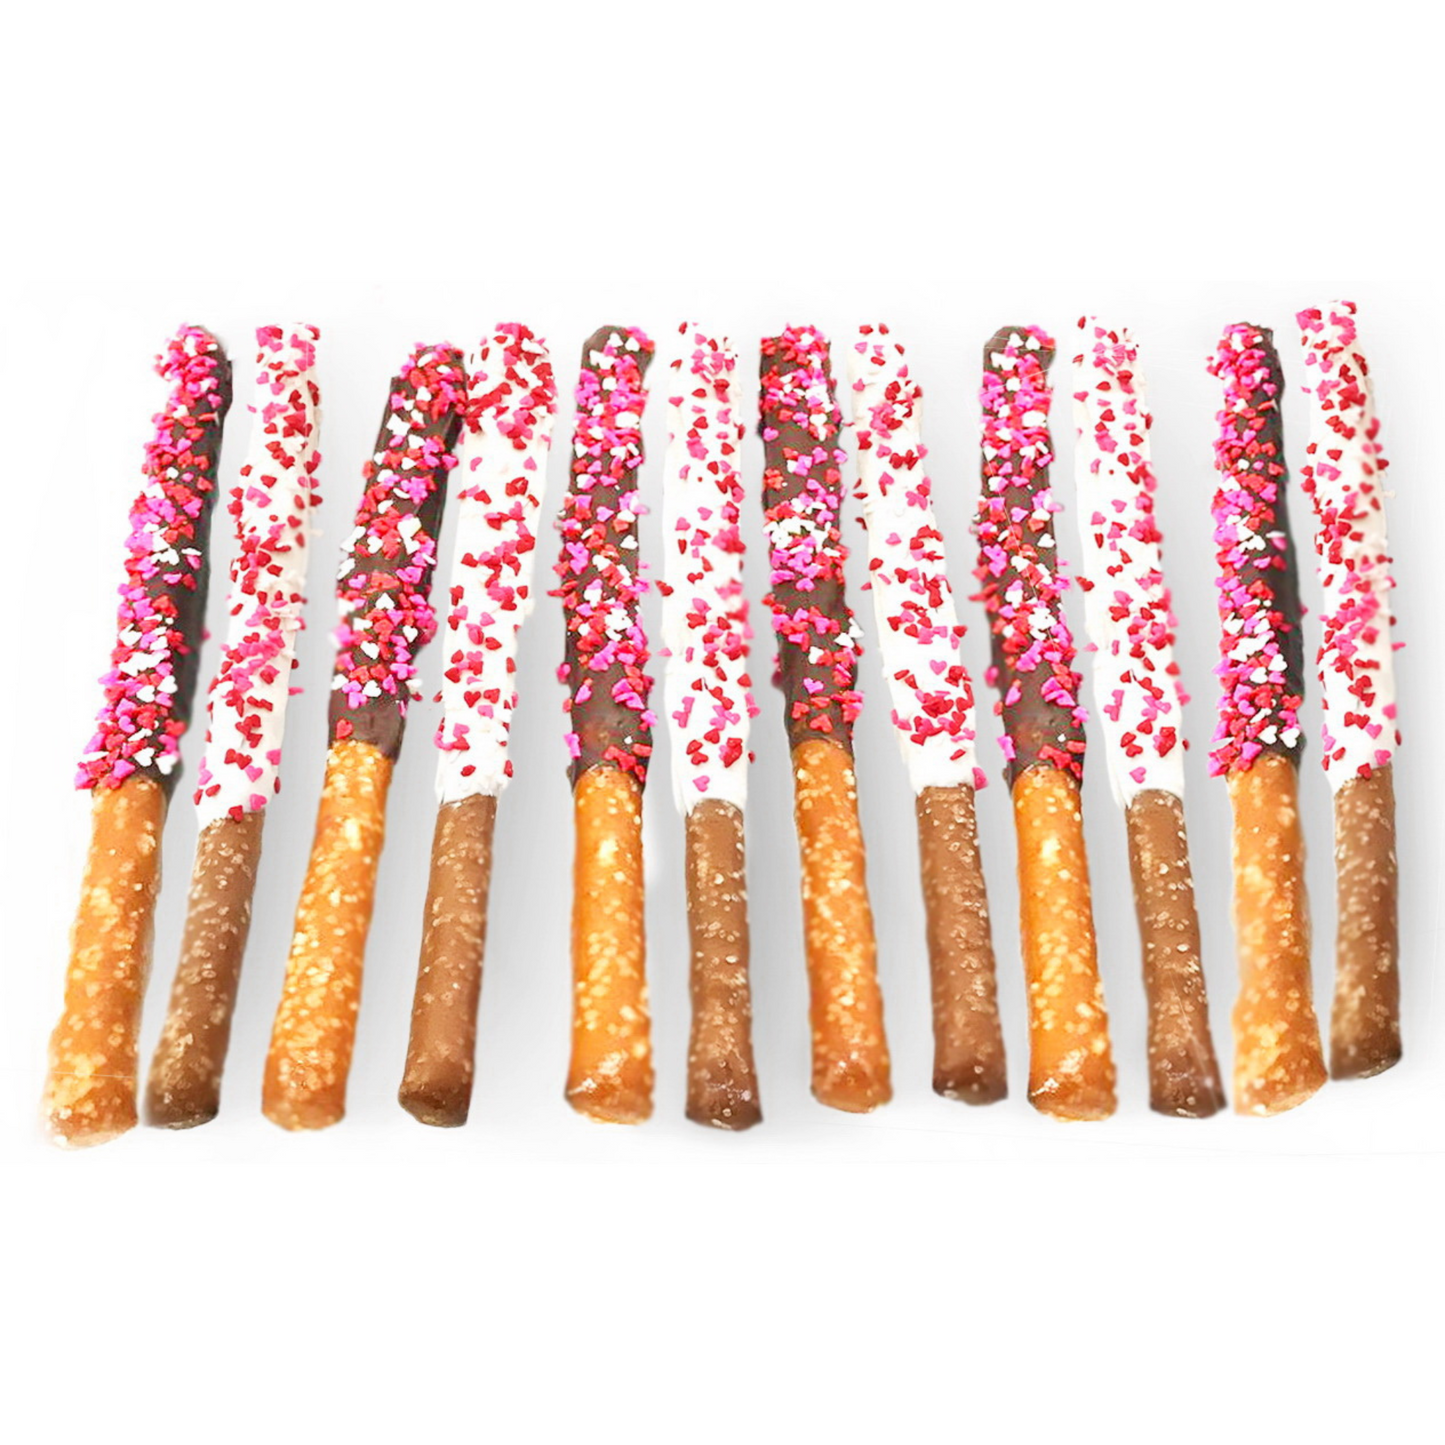 Mother's Day Chocolate Pretzel Rods with Heart Sprinkles - Mixed Flavors